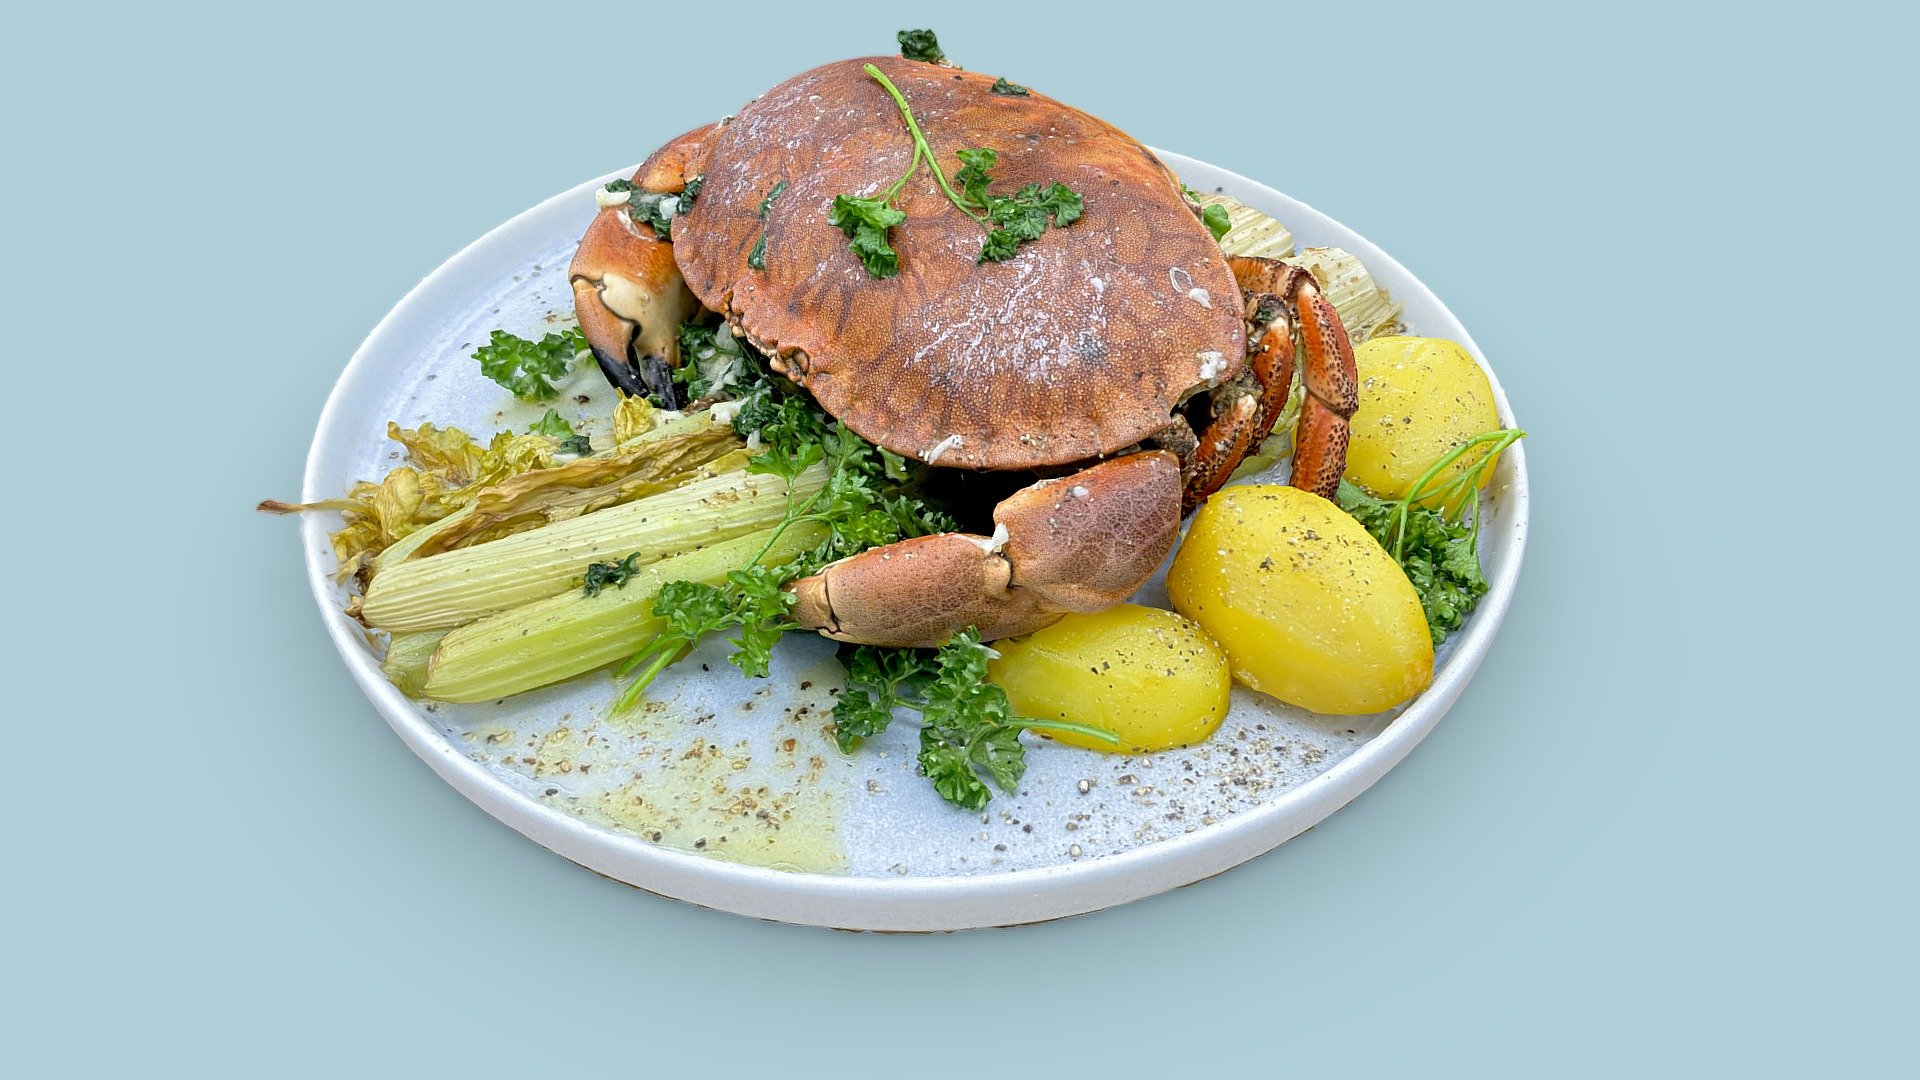 Garlic butter crab and oven roasted celery.

more info:




View my Metaverse/AR/VR recipes on. Zoltanfood

Support me on. Patreon

Find me on. Opensea

file types:

5k poly in 2k texture
50k poly in 4k texture
200k poly in 4k texture - The Garlic Butter Crab - Buy Royalty Free 3D model by Zoltanfood 3d model